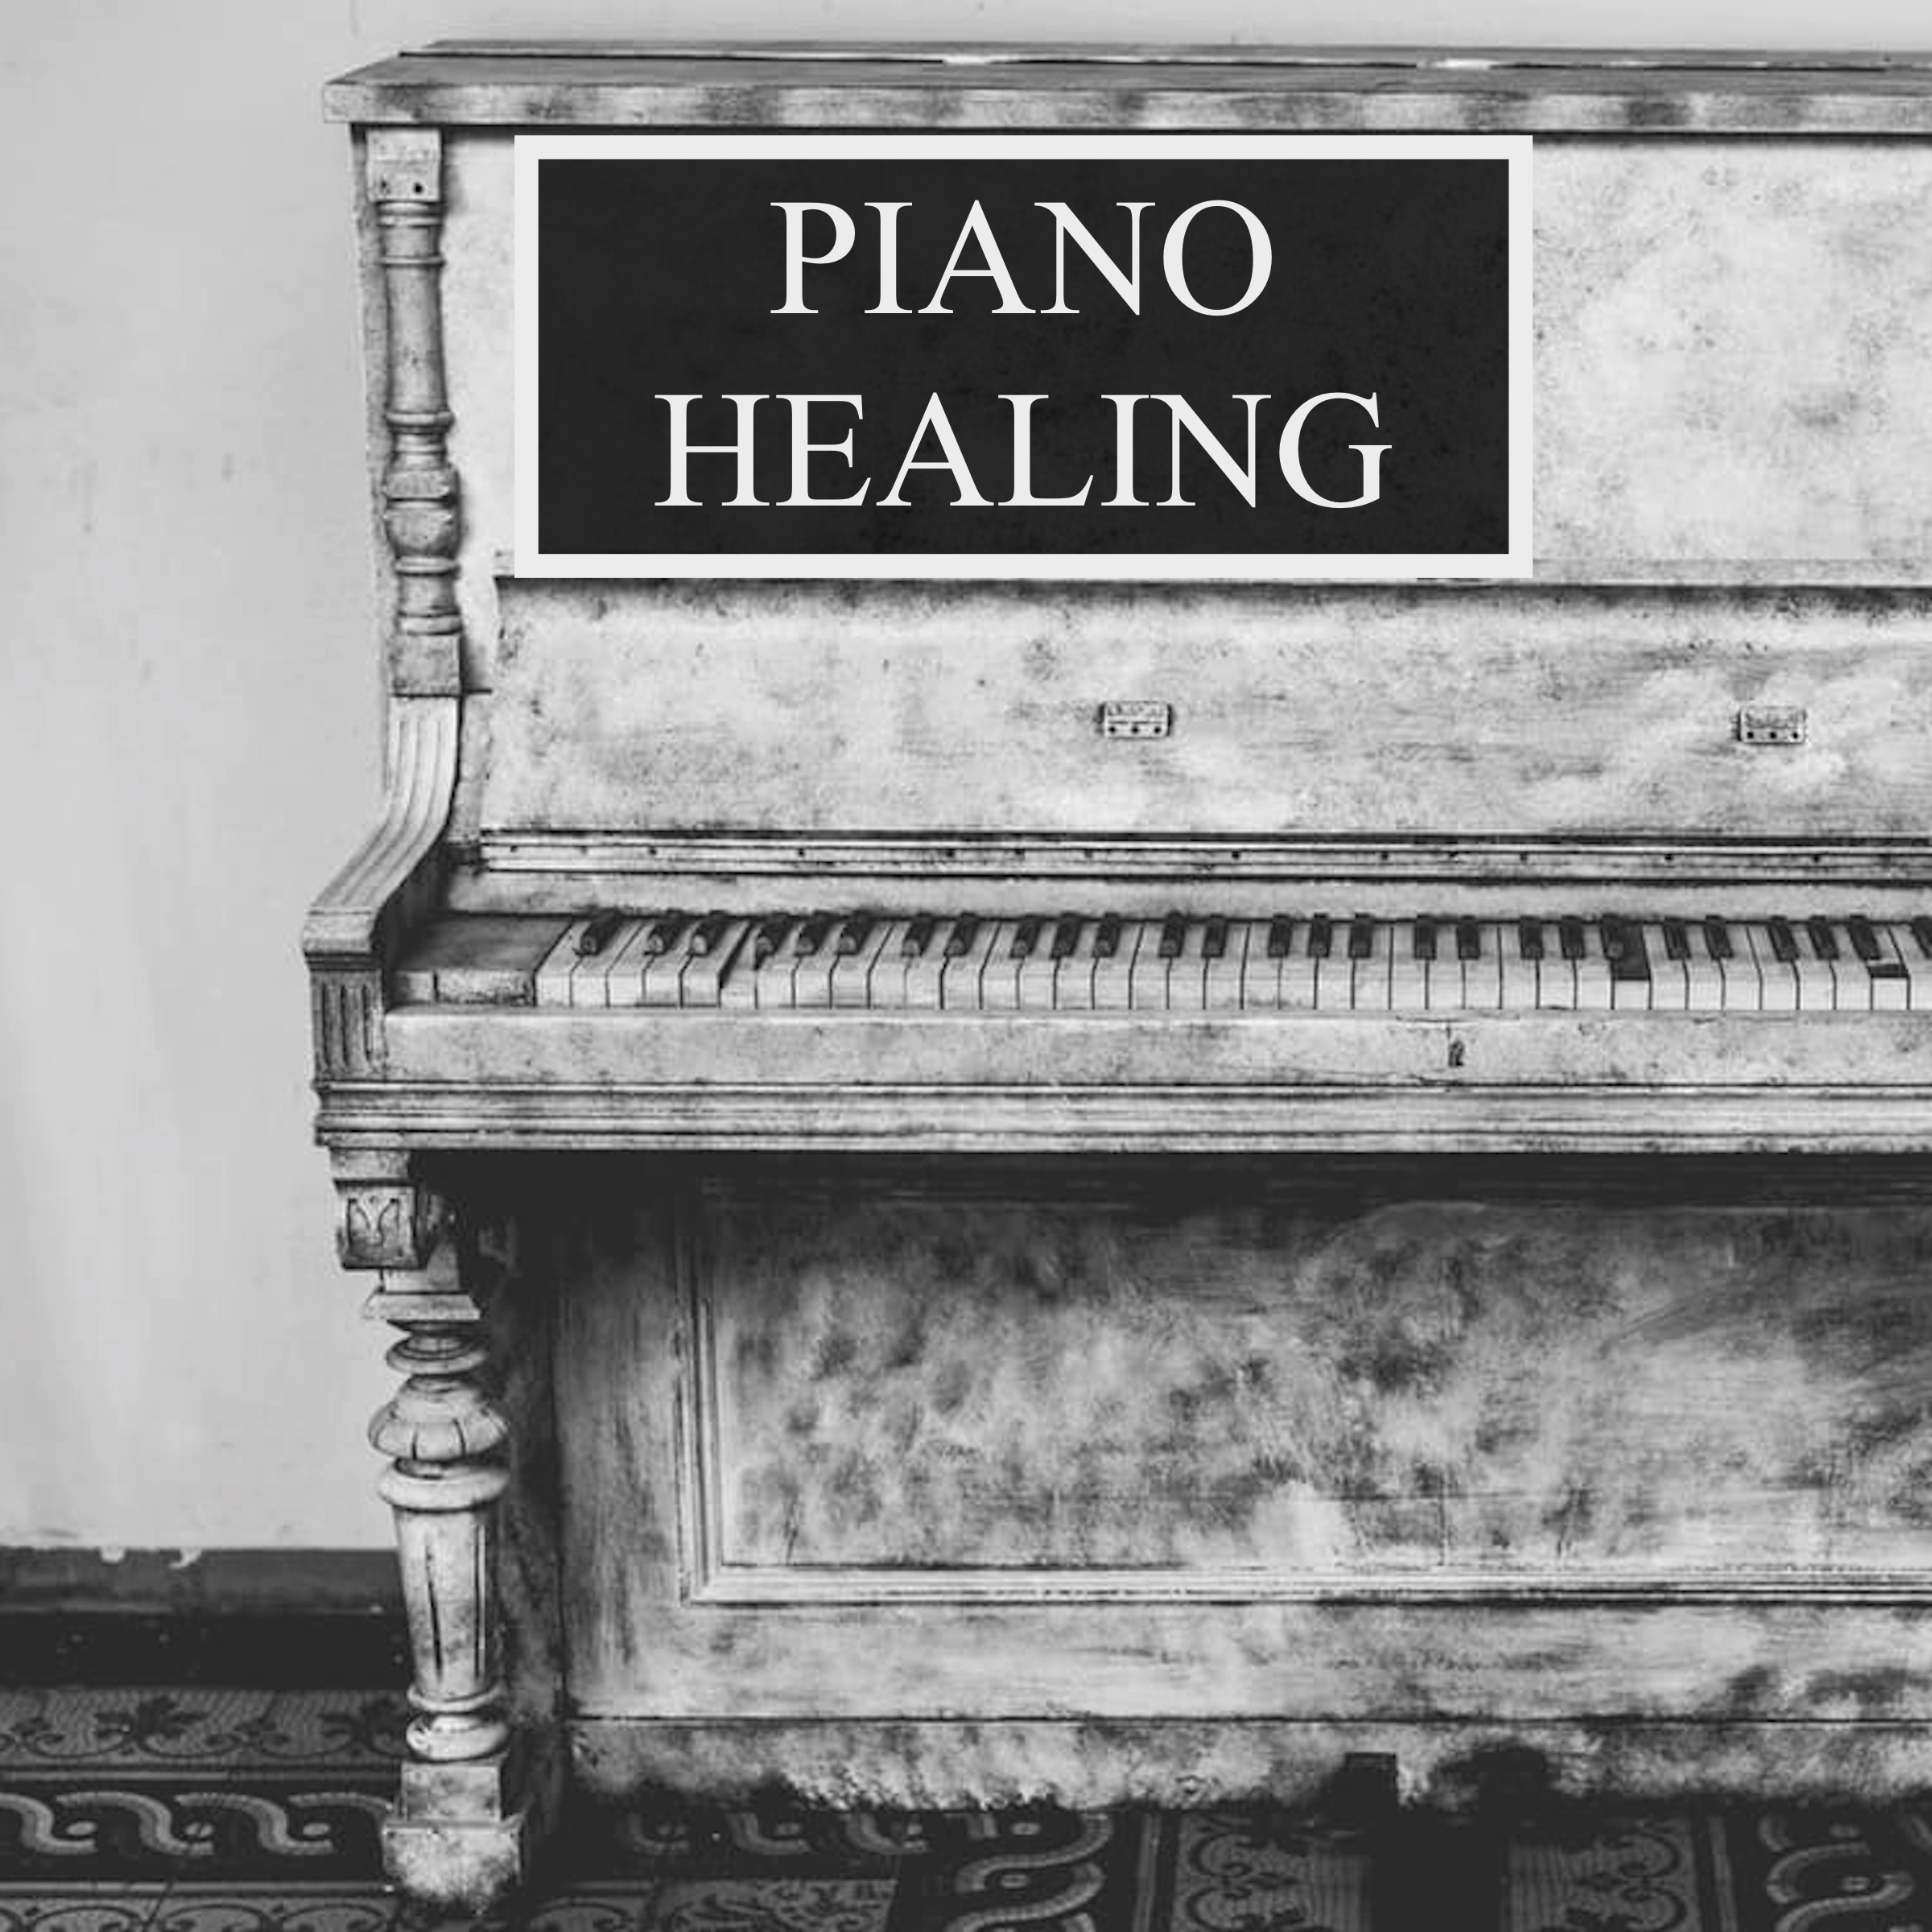 Piano Healing - Gentle Soothing Songs to Take Away Stress and Help Create a Feeling of Relaxation